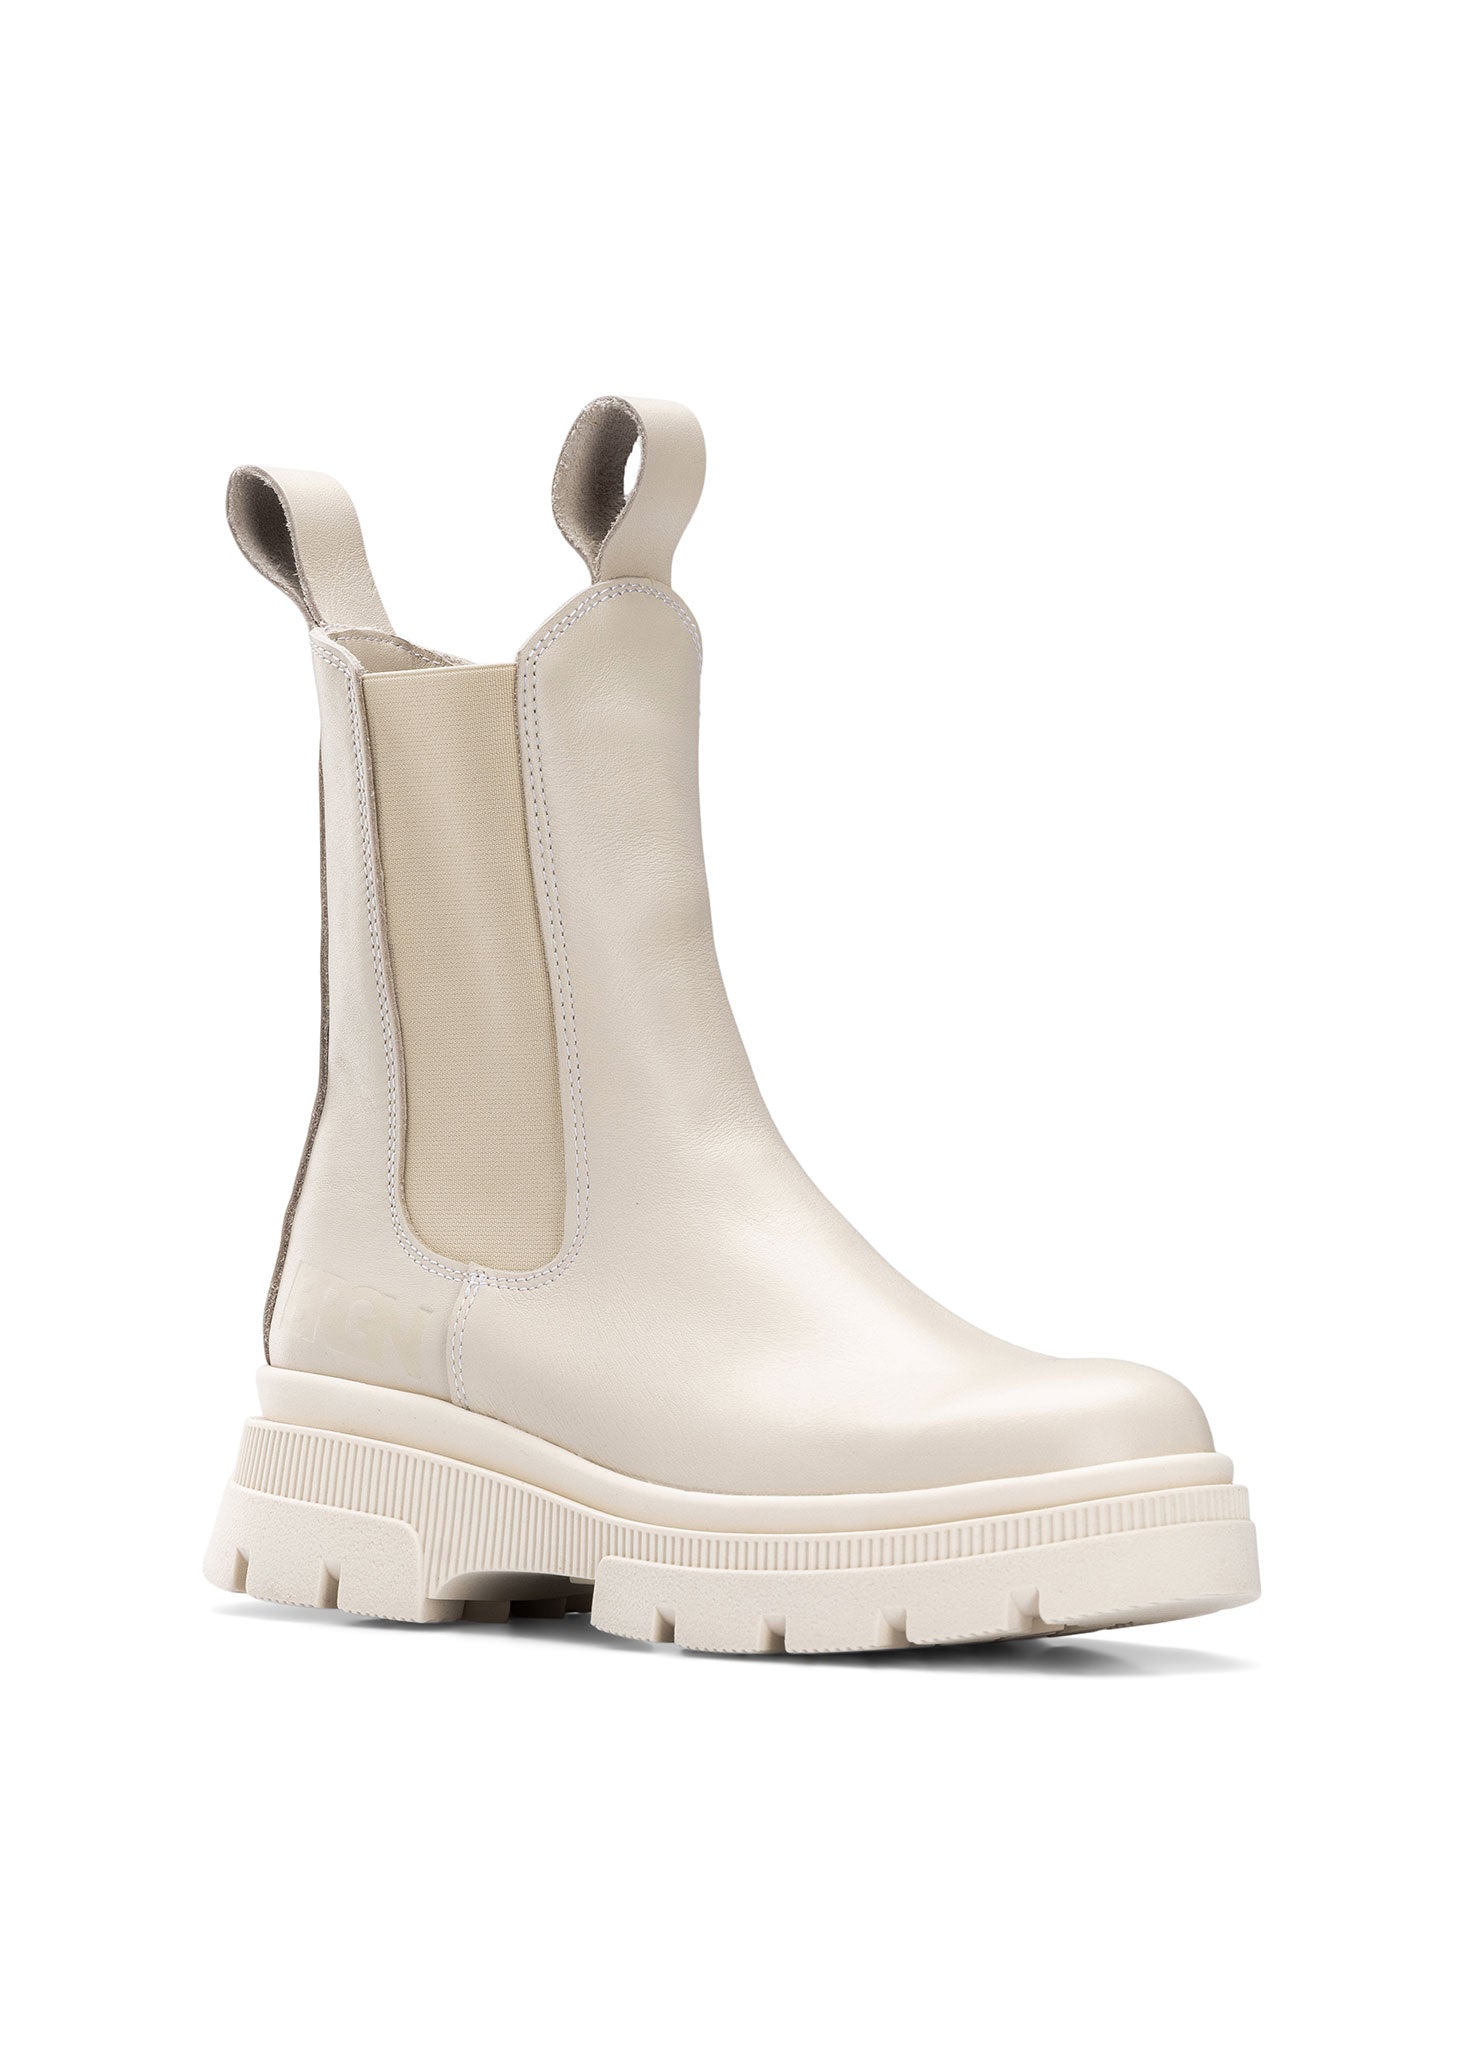 BRGN Chelsea Boot Shoes 135 Sand